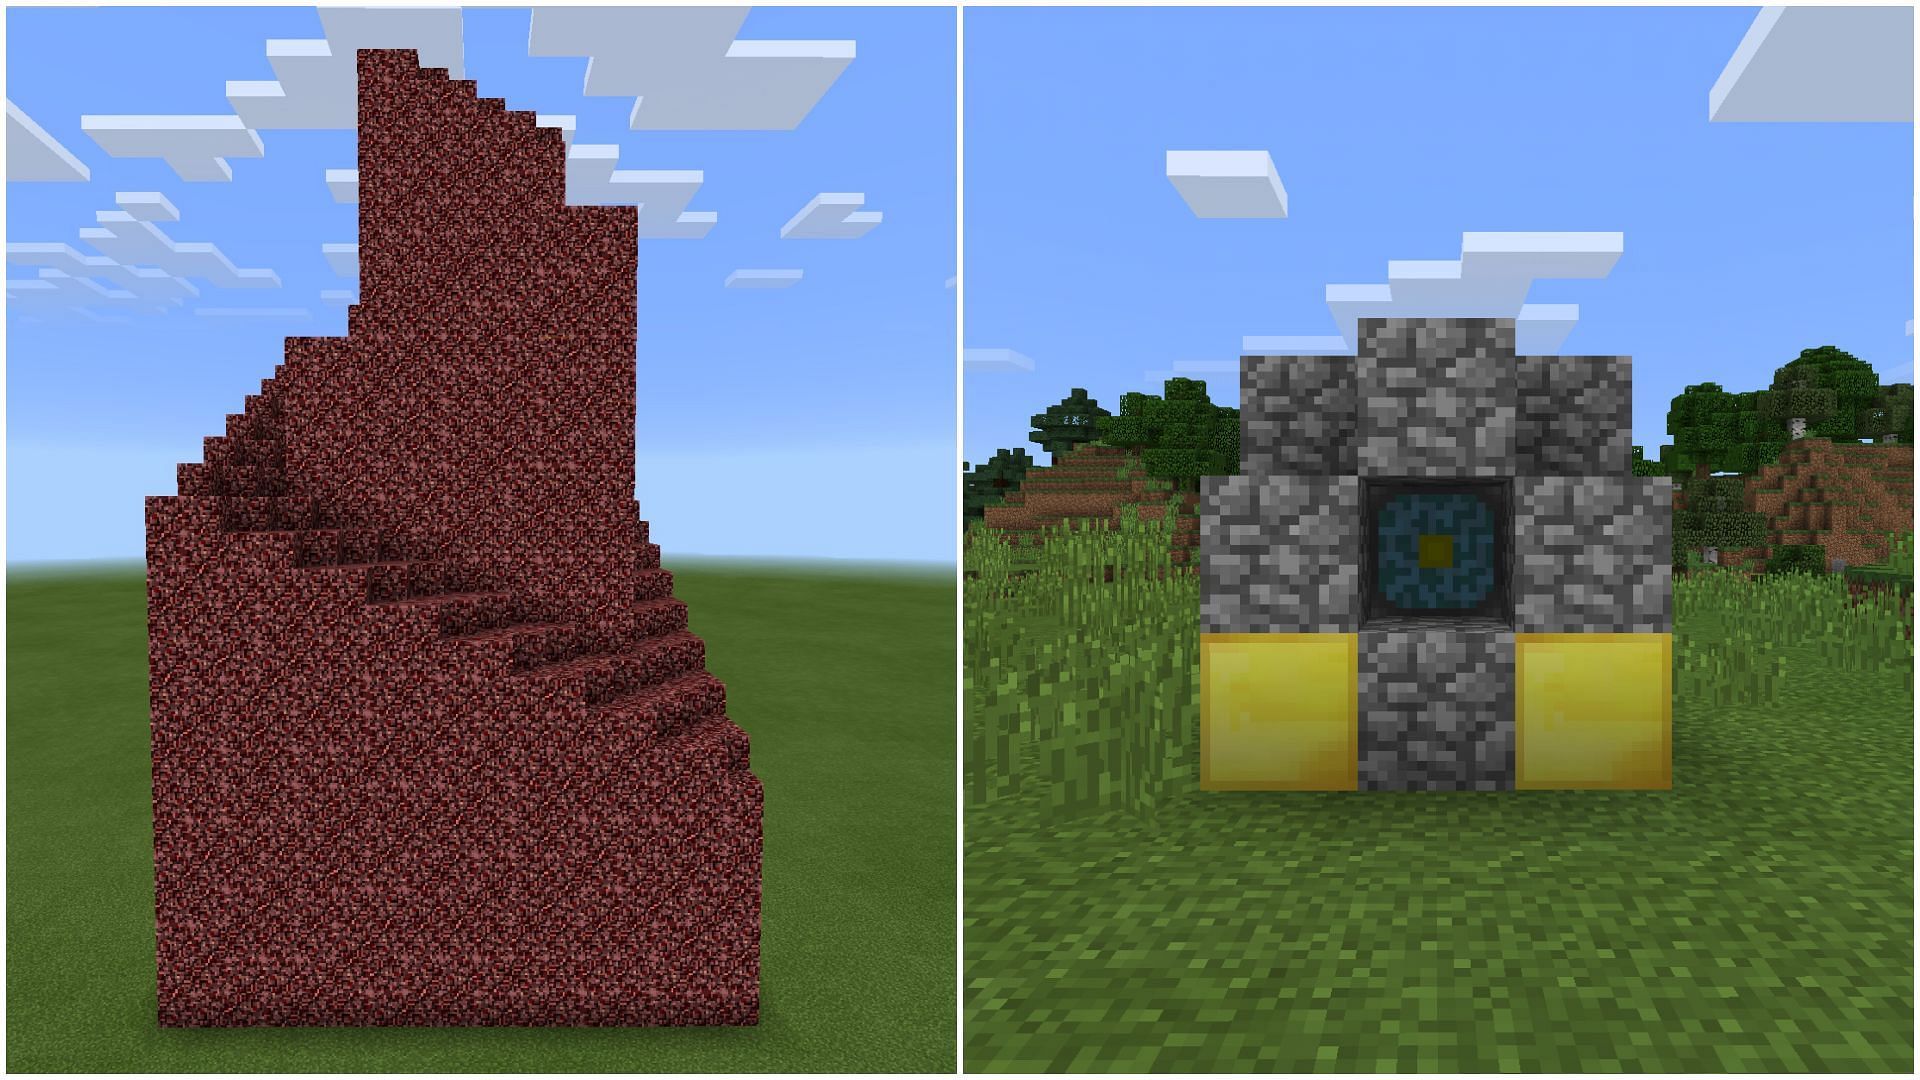 Nether Spire and Nether Reactor Core were old iconic features that were removed from Minecraft PE (Image via Minecraft Wiki)